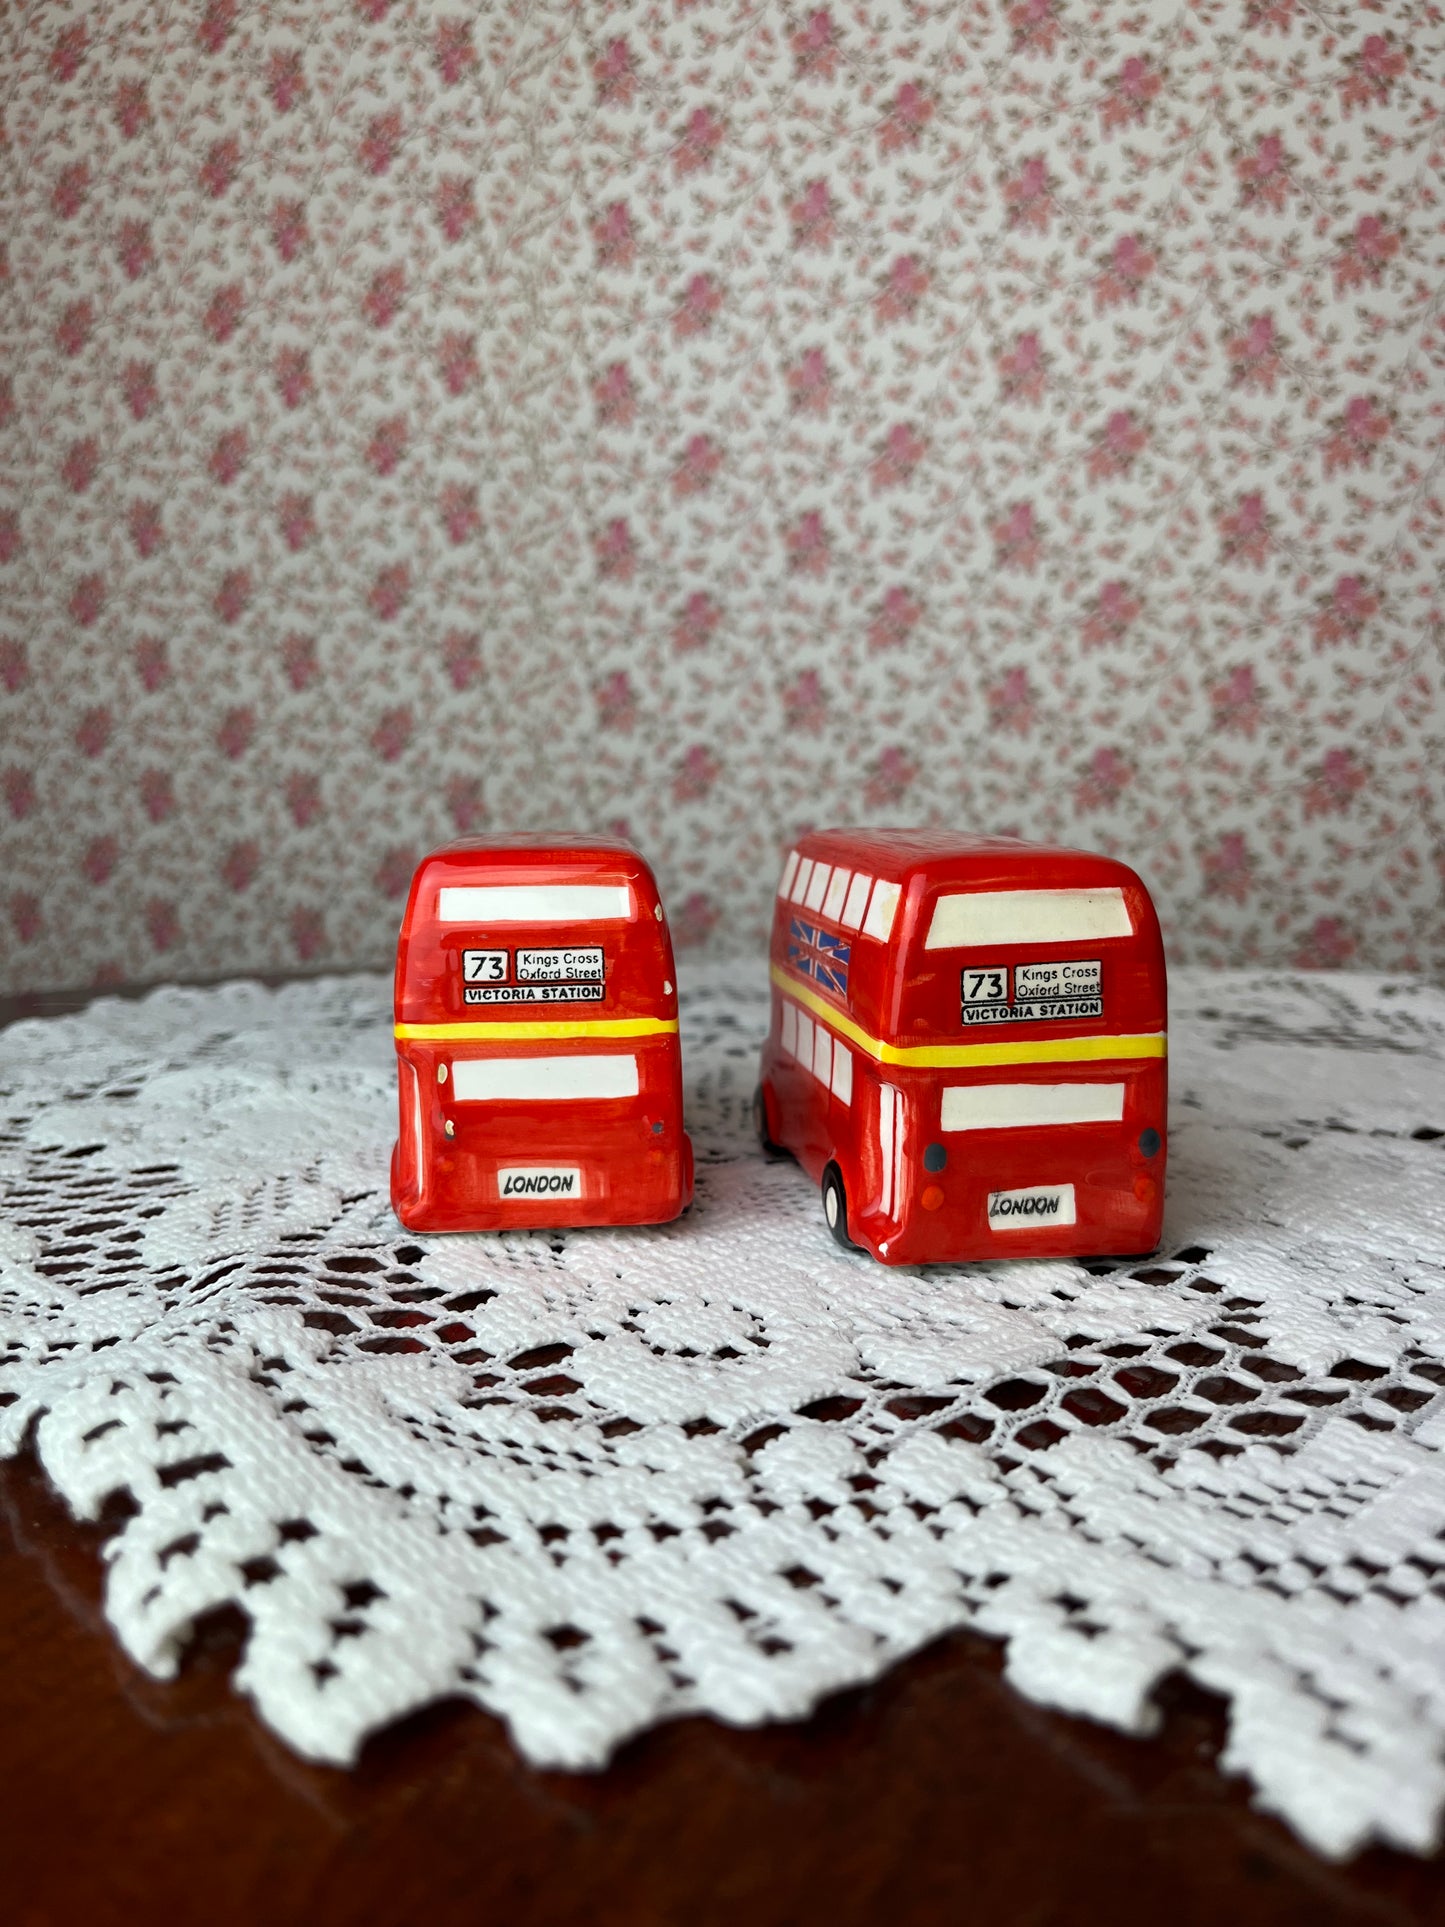 Vintage Iconic London Red Double Decker Bus Salt and Pepper Shakers